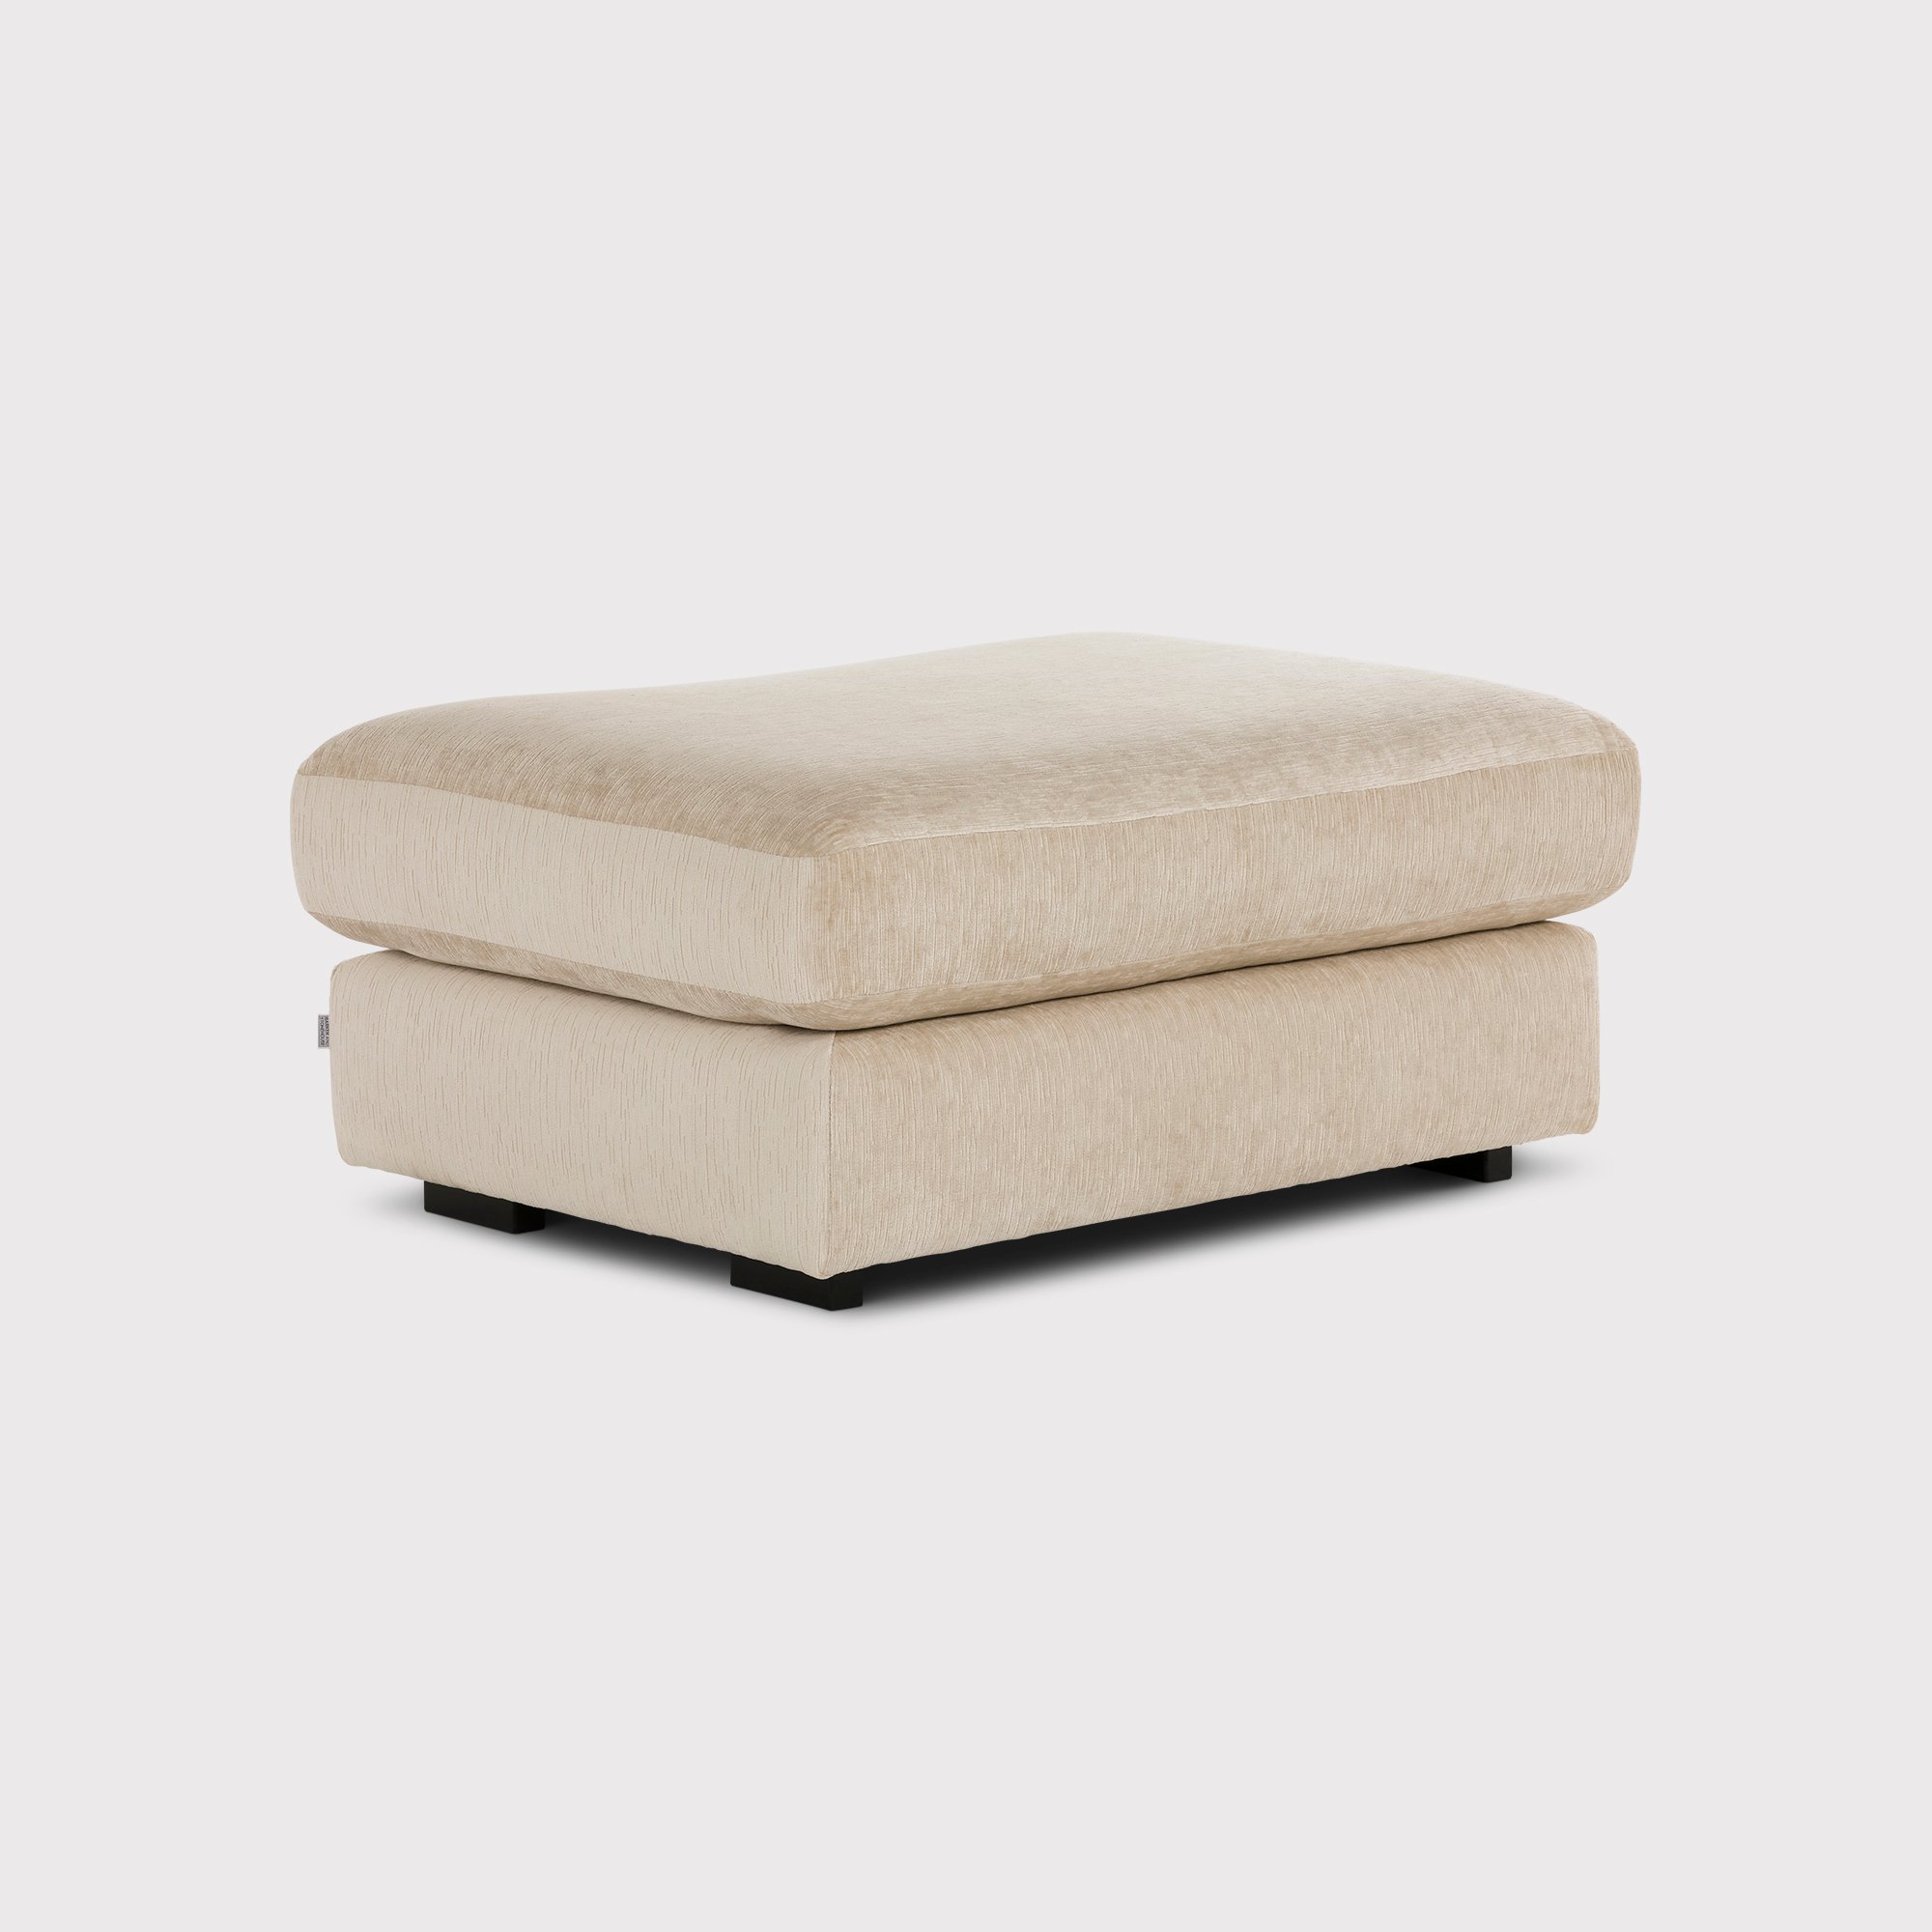 Melby Footstool, Neutral Fabric | Barker & Stonehouse